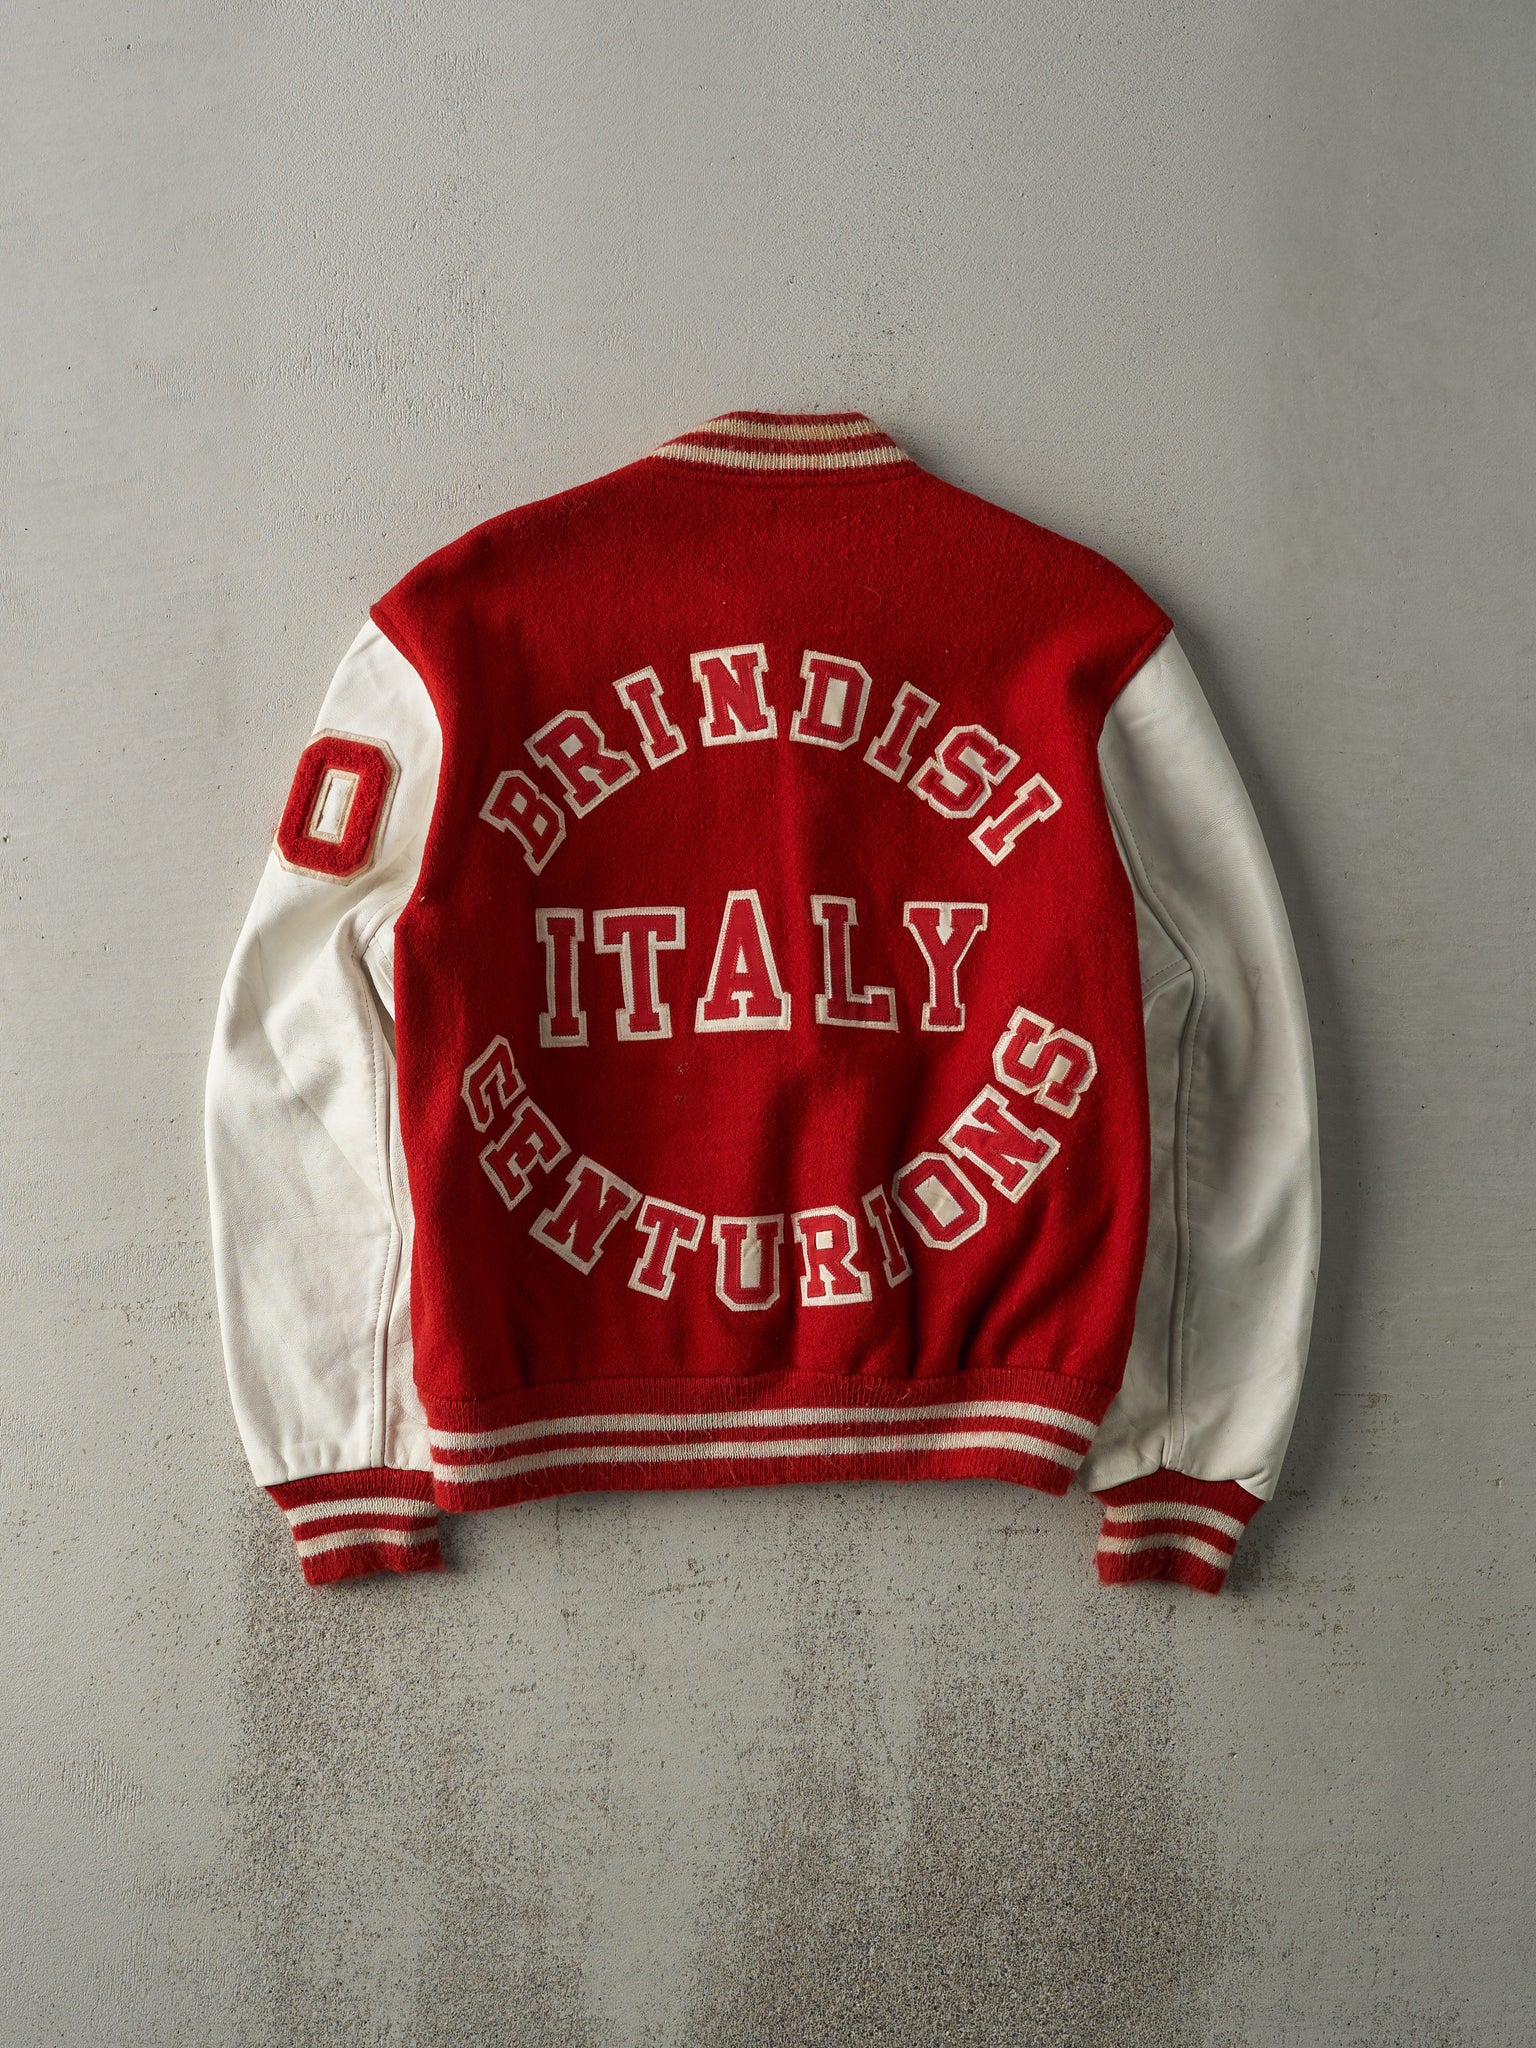 Vintage 90s Red and White Letterman Jacket (S/M)